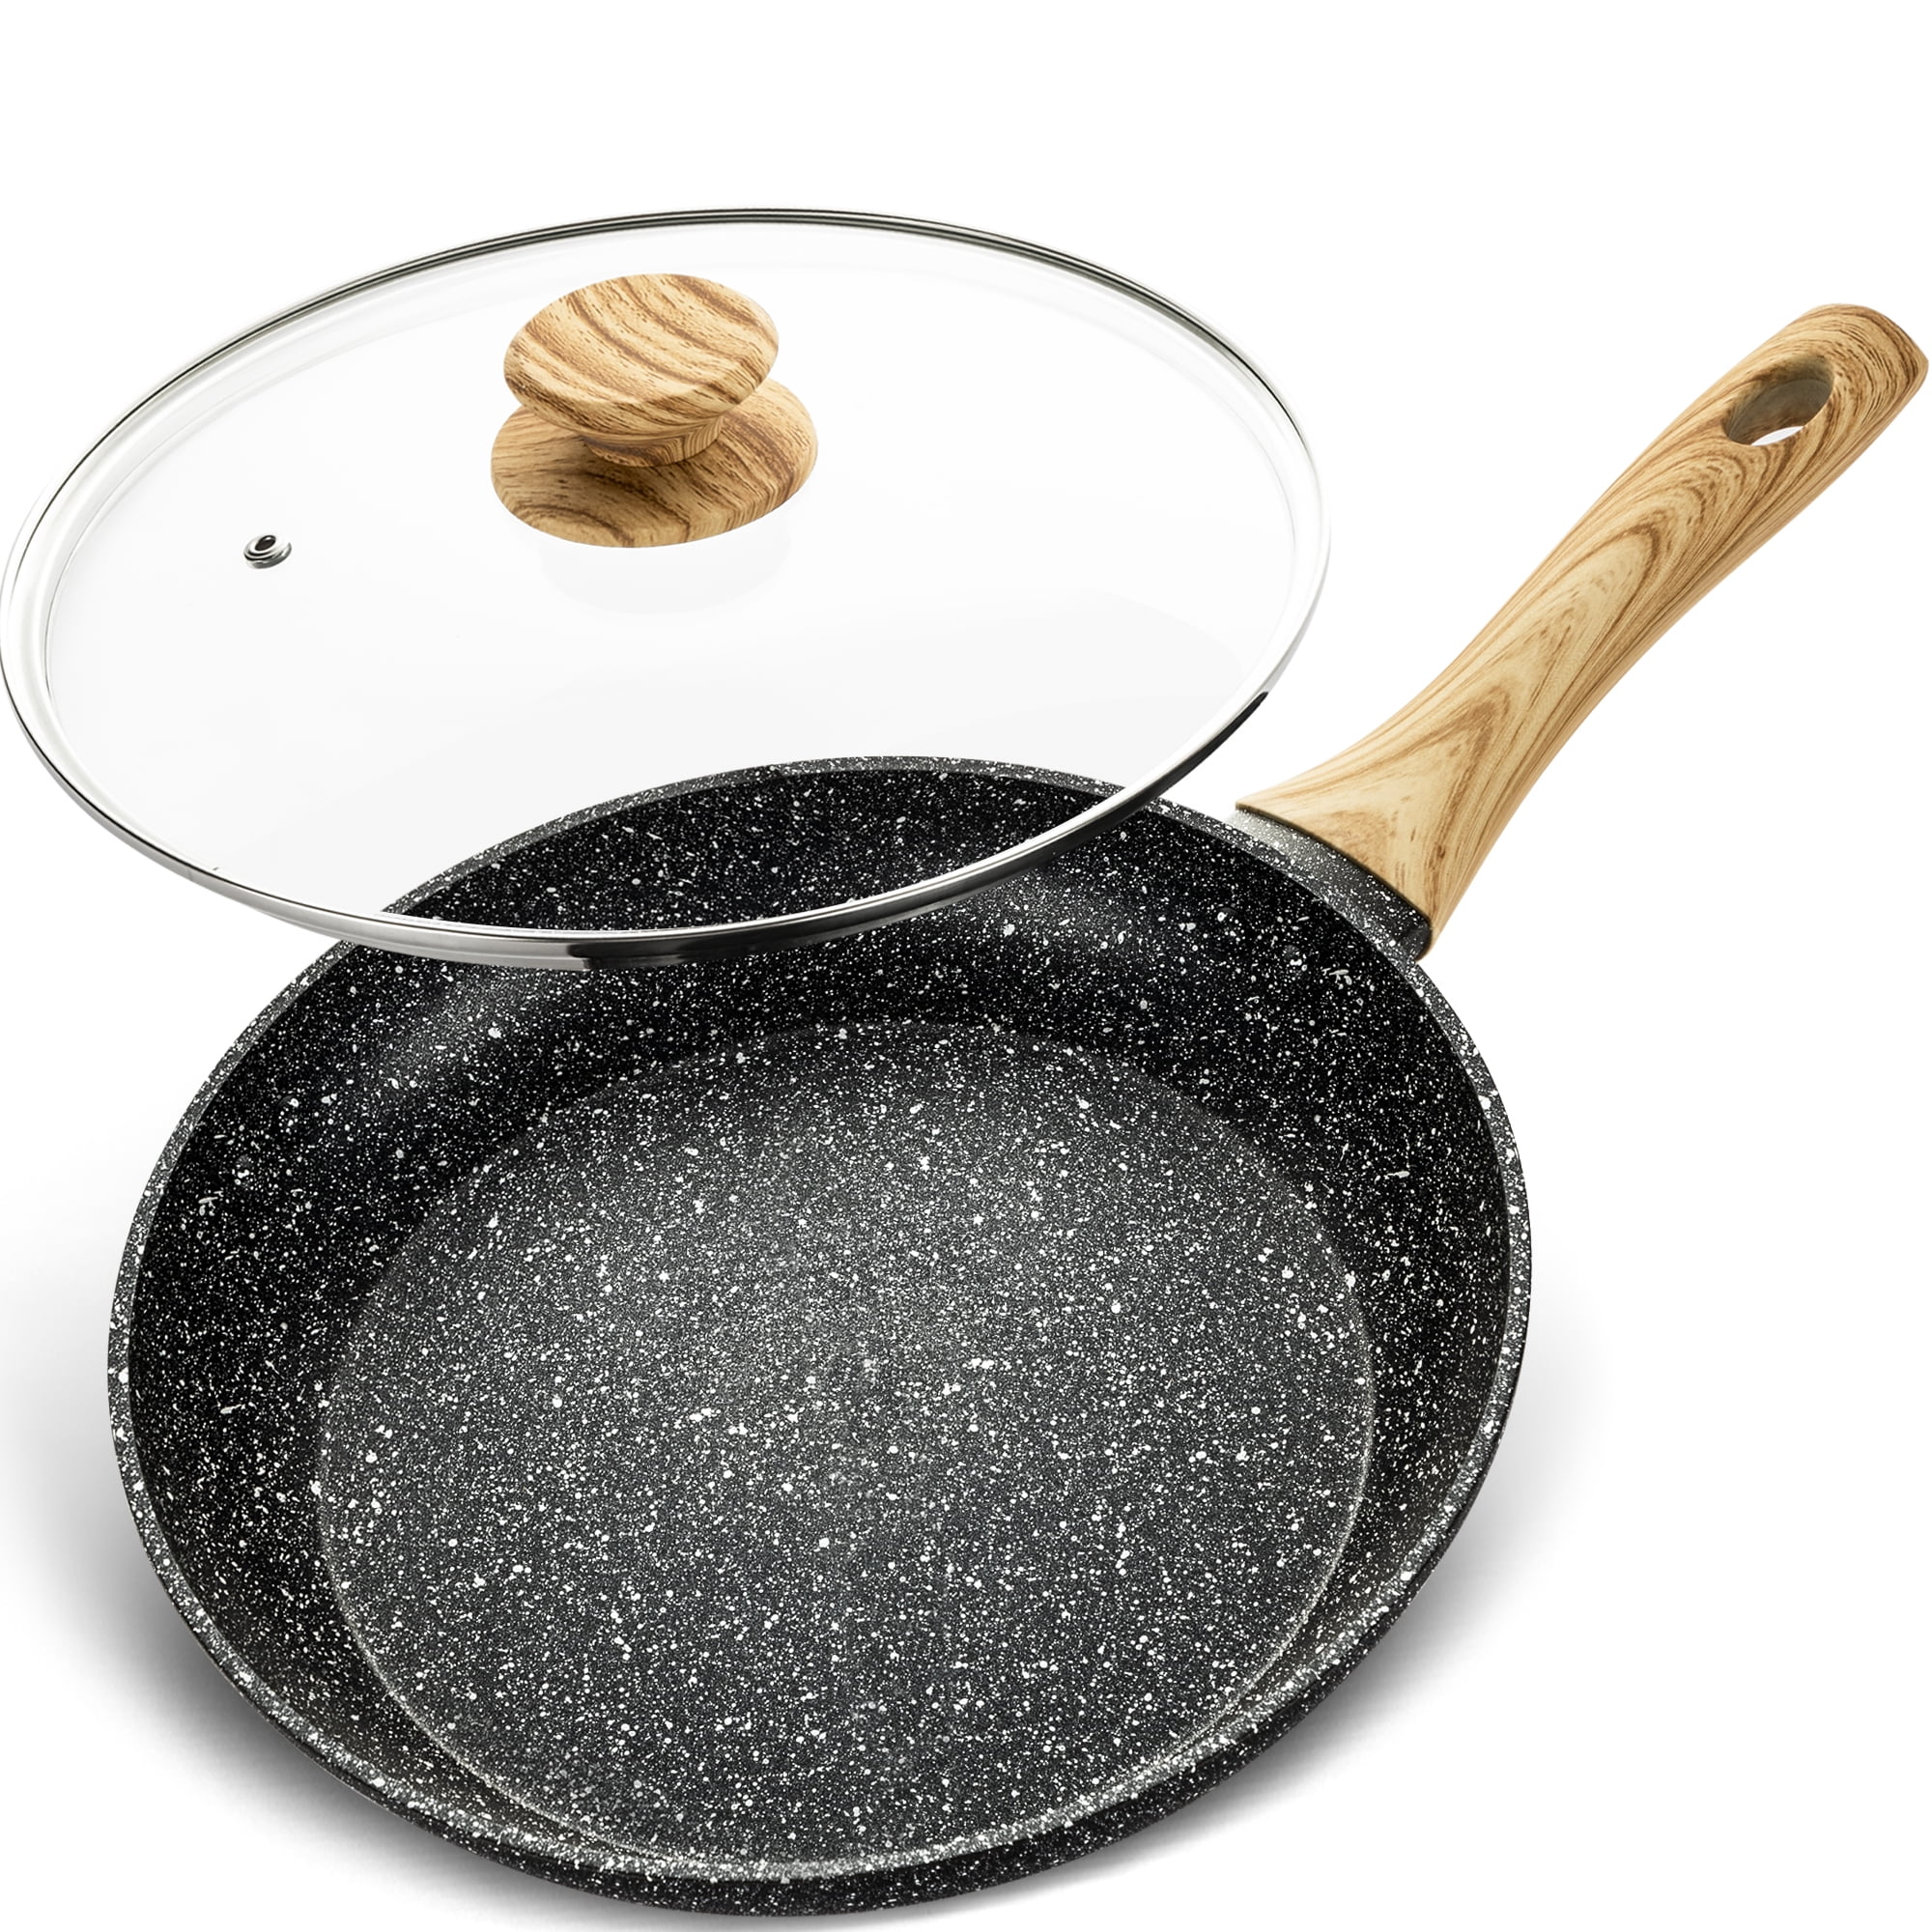  MICHELANGELO Frying Pan with Lid 8' & 10, Hard Anodized Frying  Pan Nonstick Skillet: Home & Kitchen